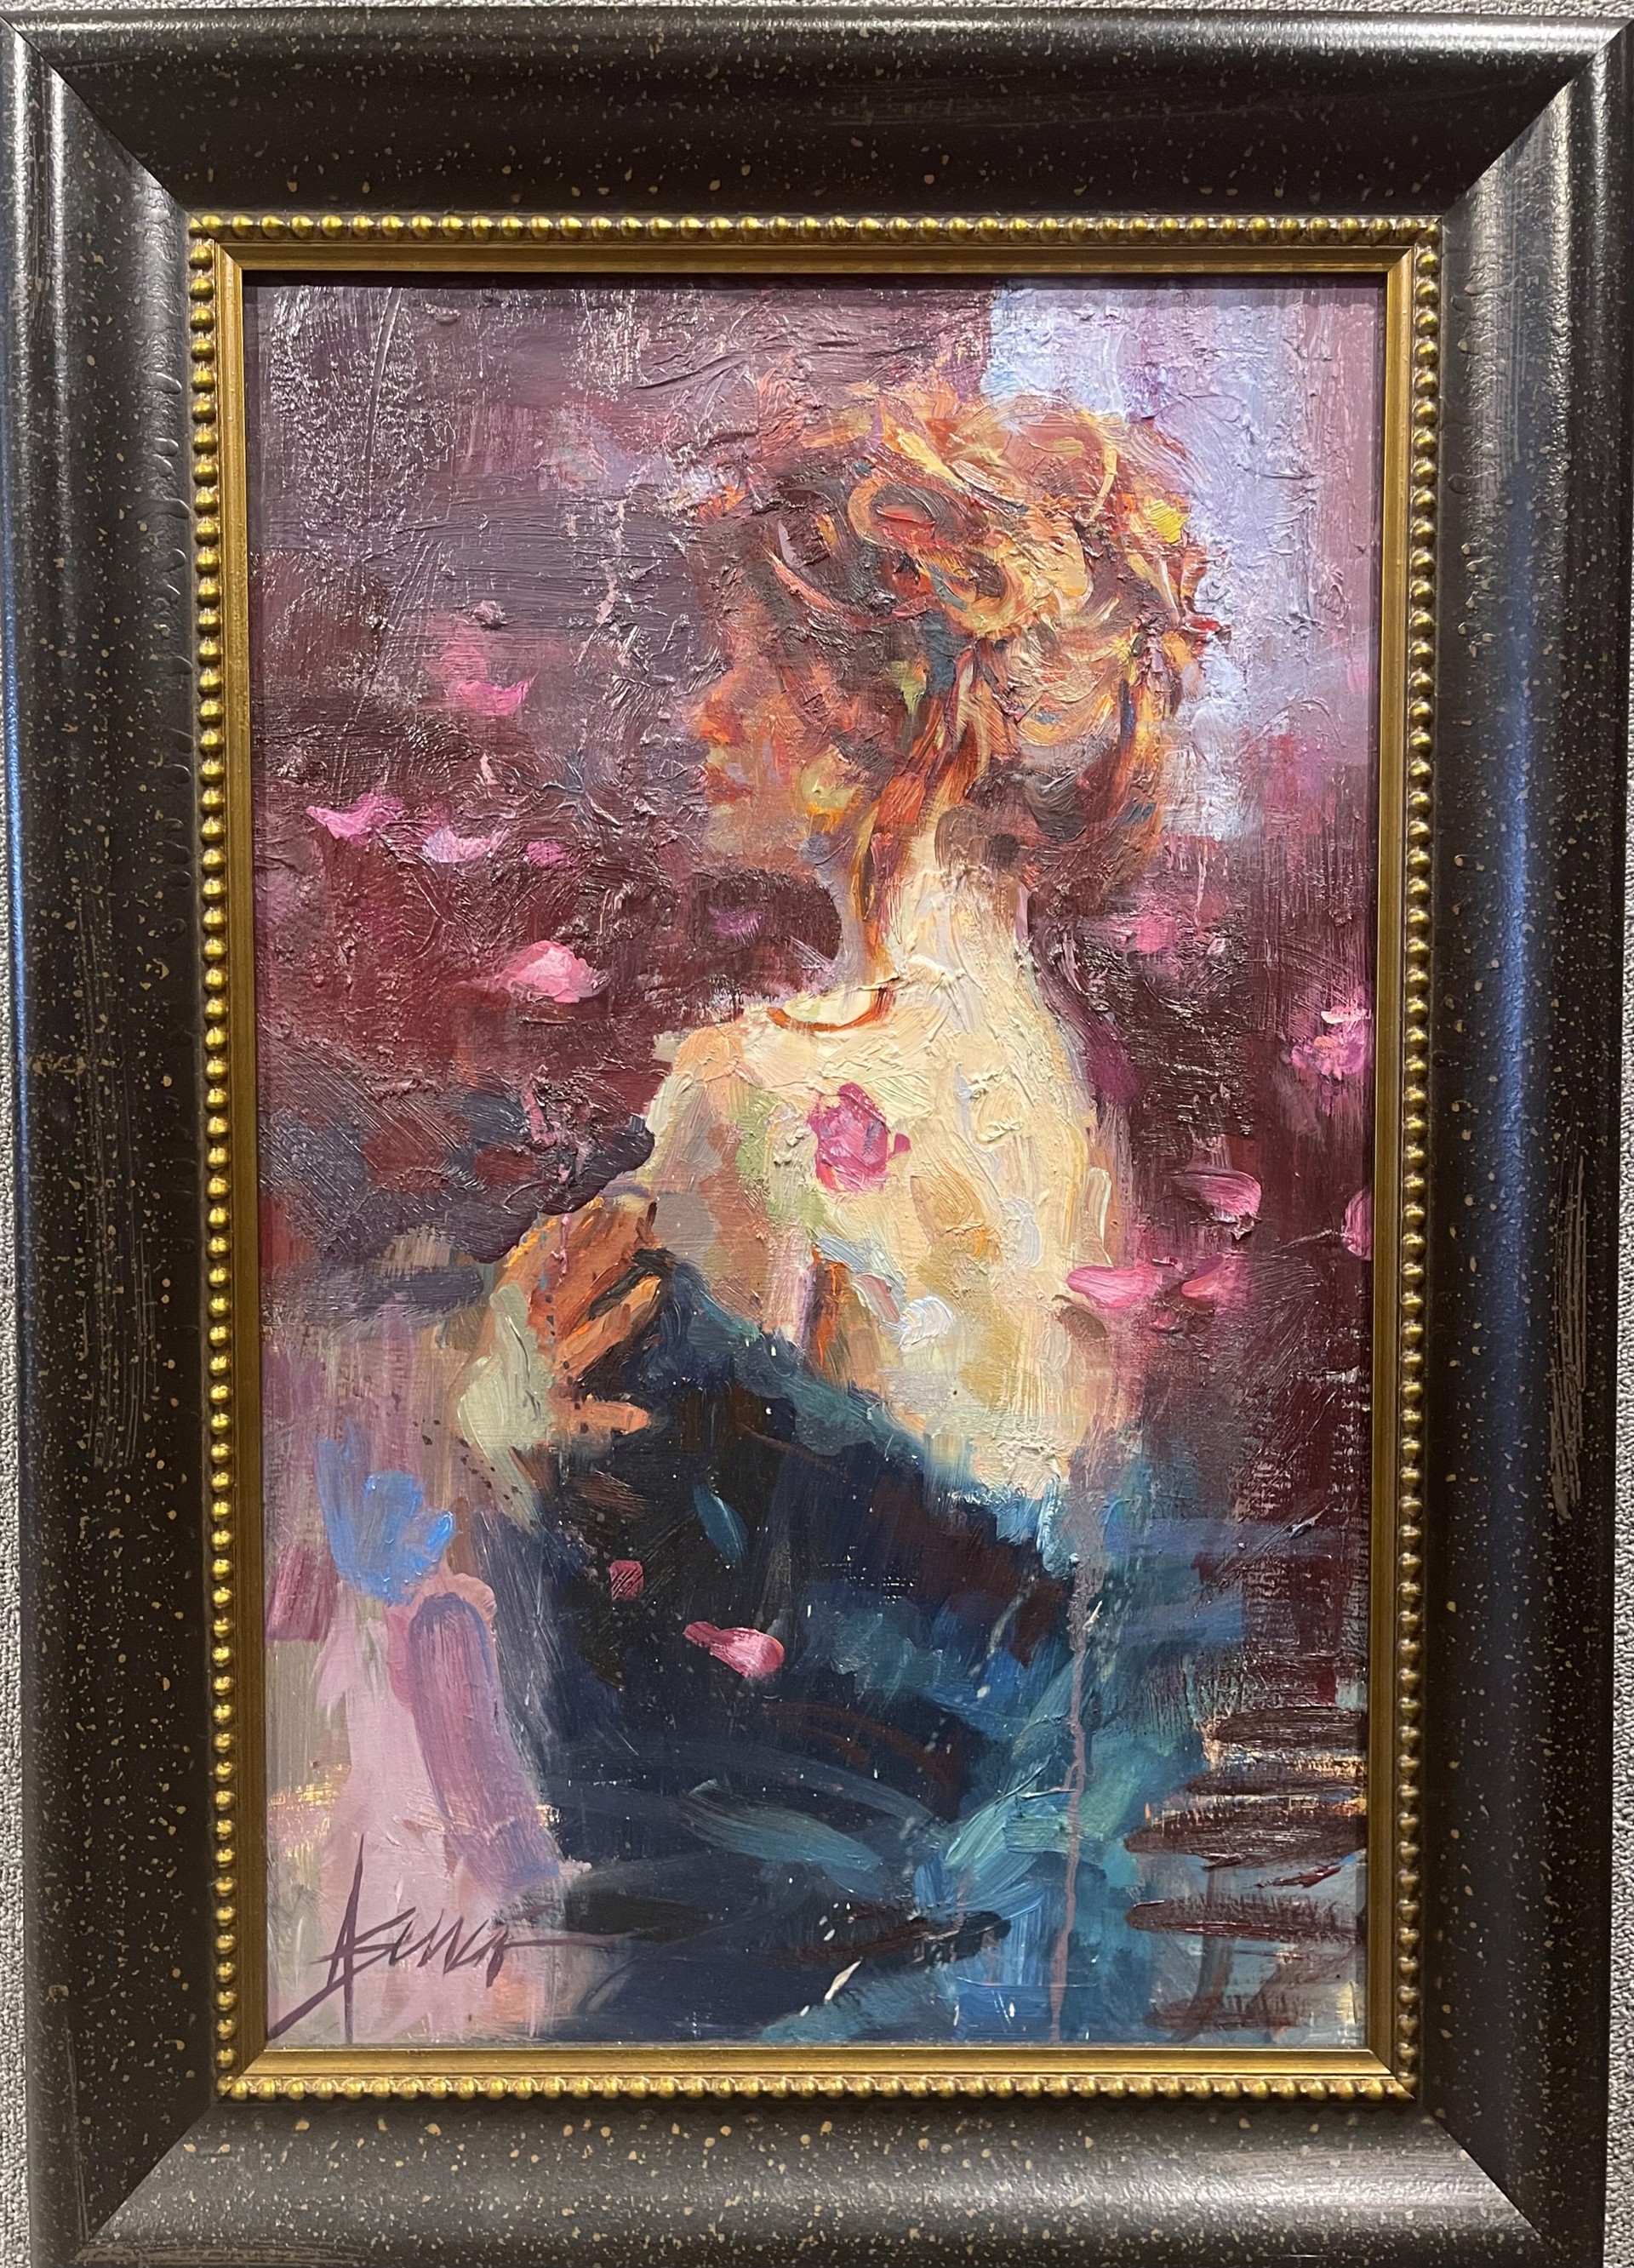 Memories Abound by Henry Asencio